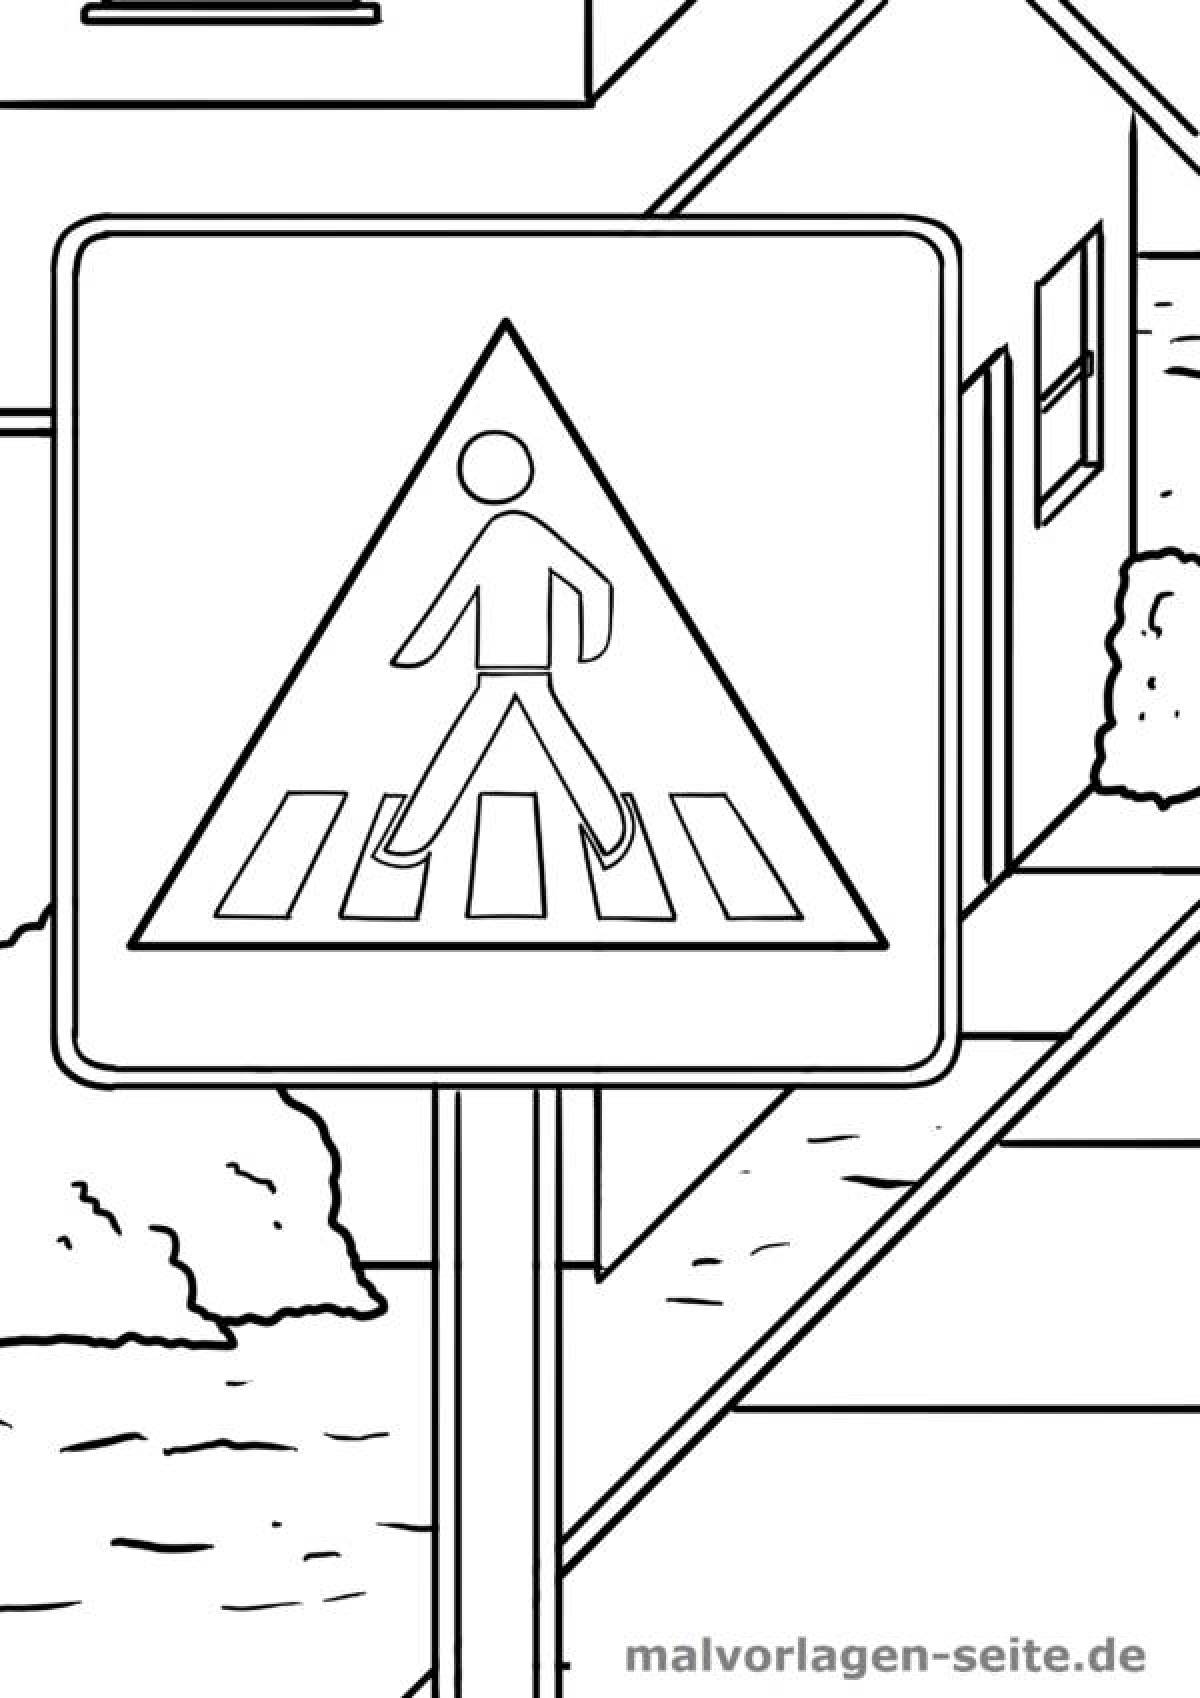 Crossing sign #3